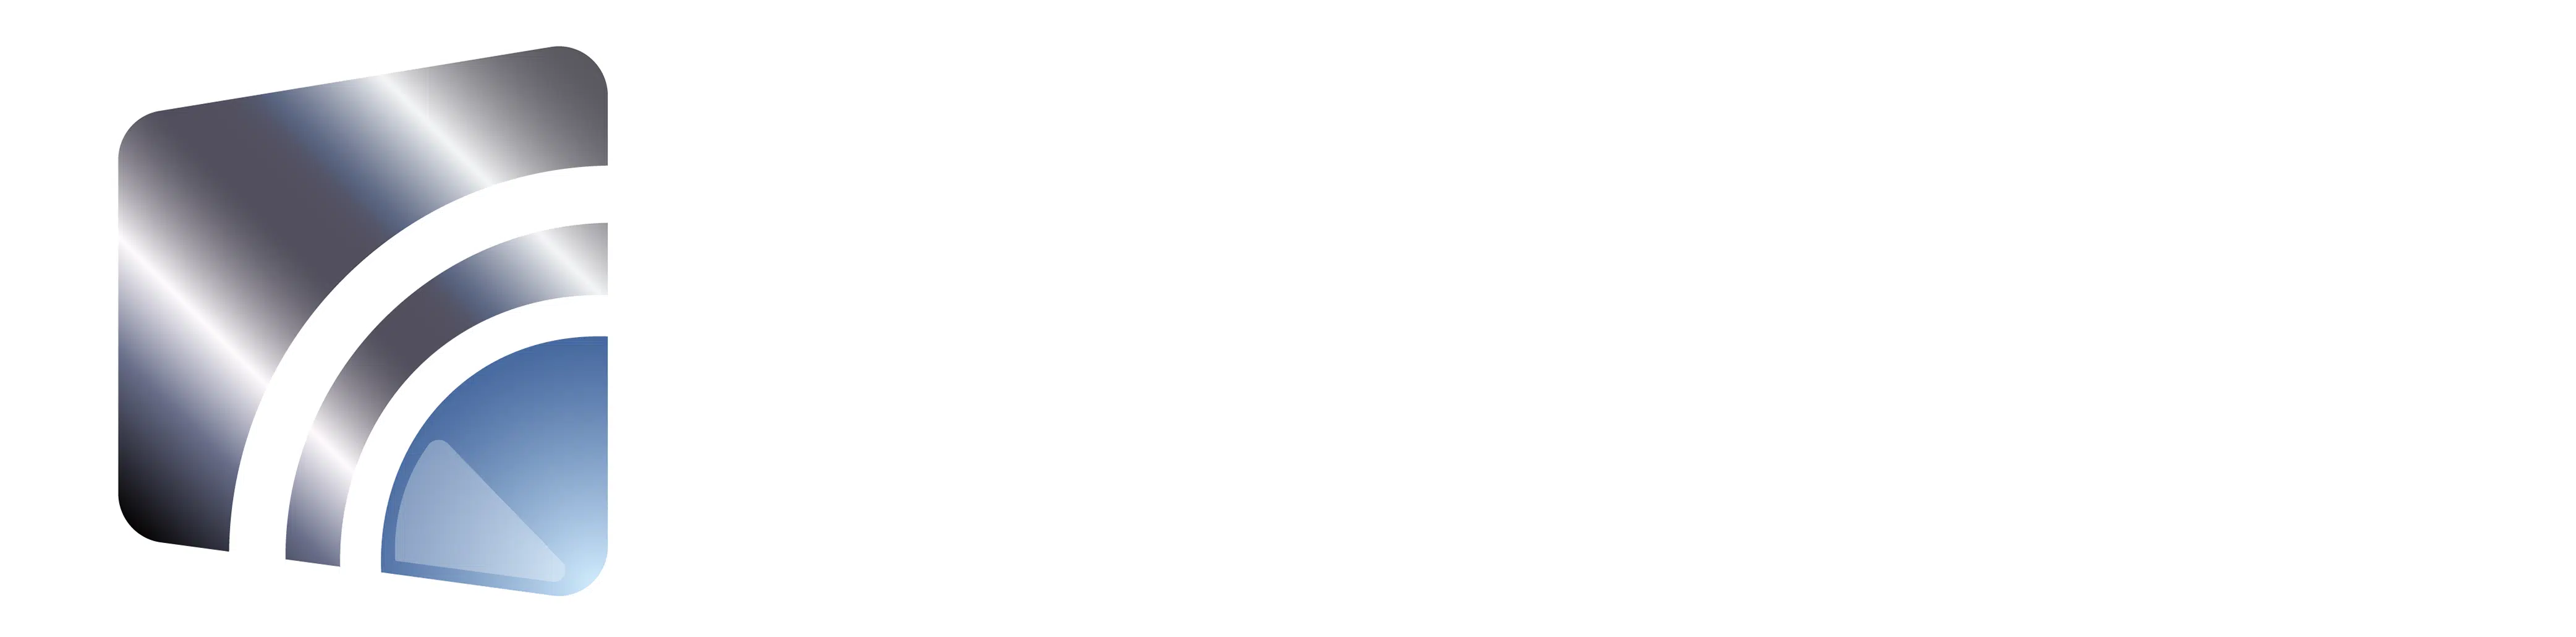 clear choice pool fencing